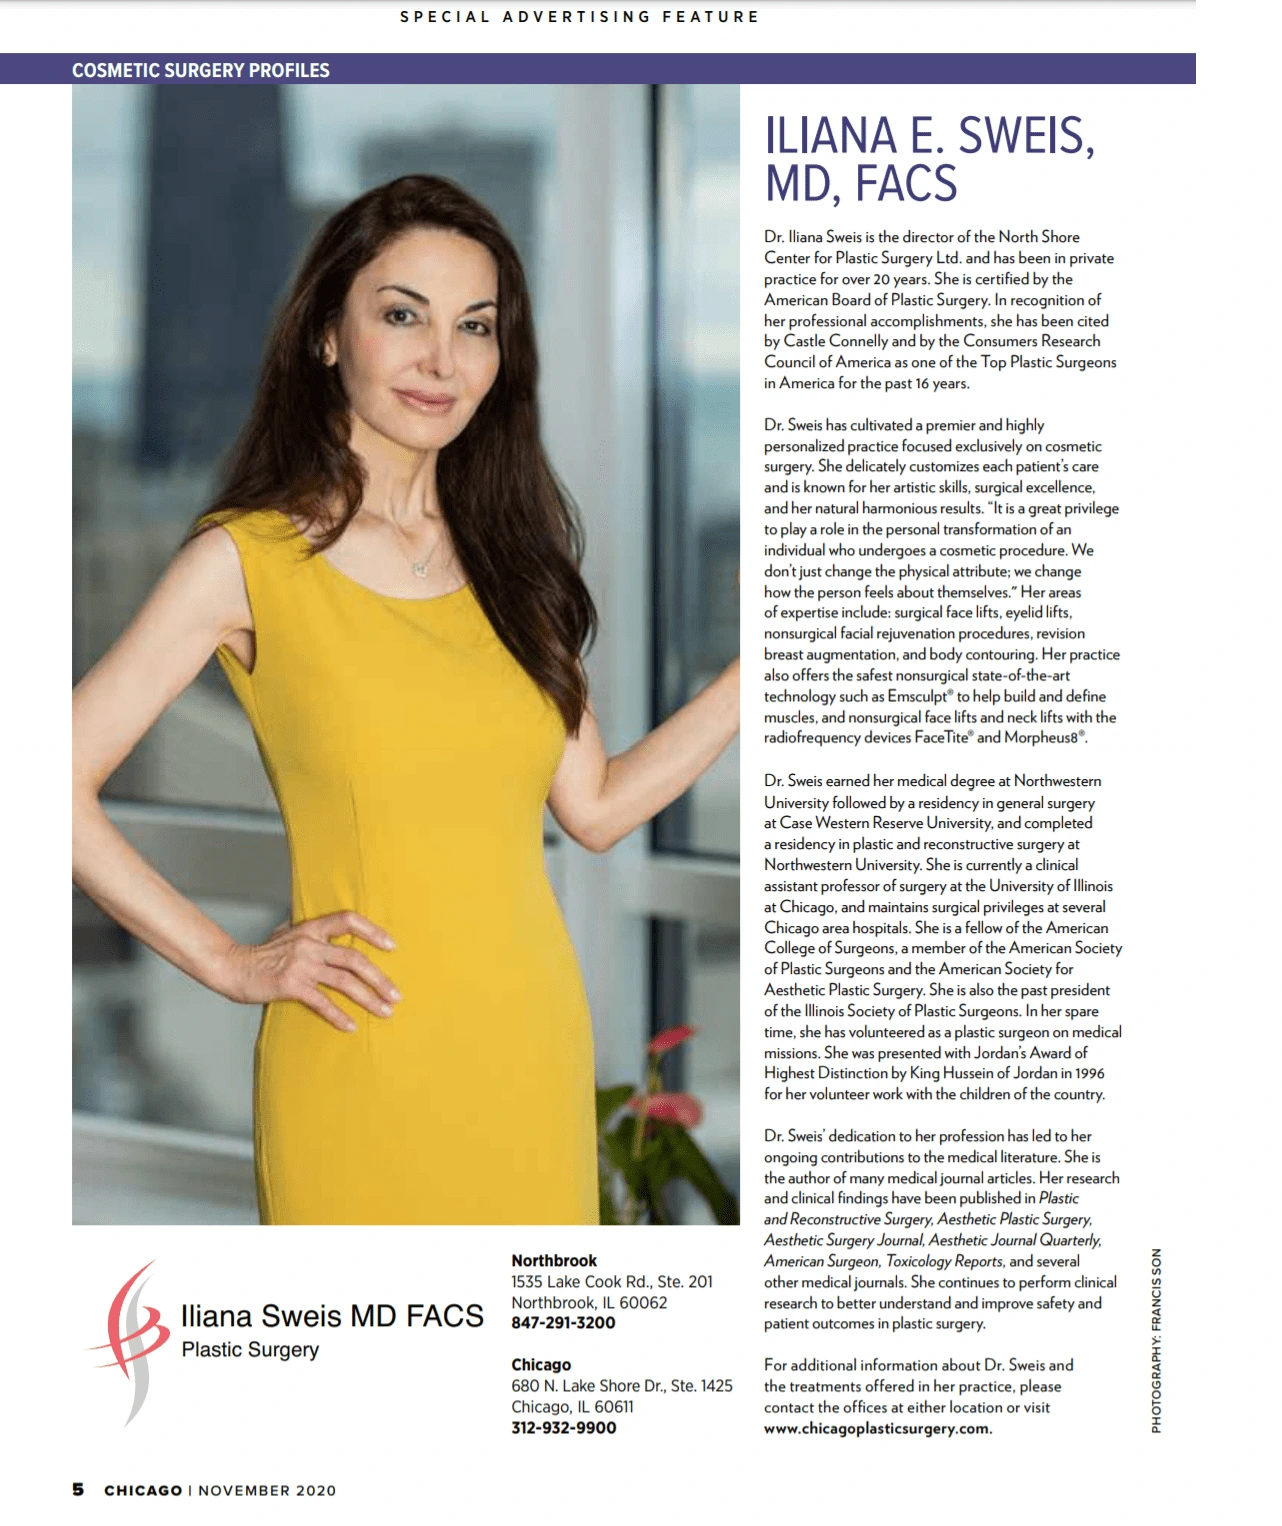 special advertising feature Iliana E. Sweis, MD DAGC